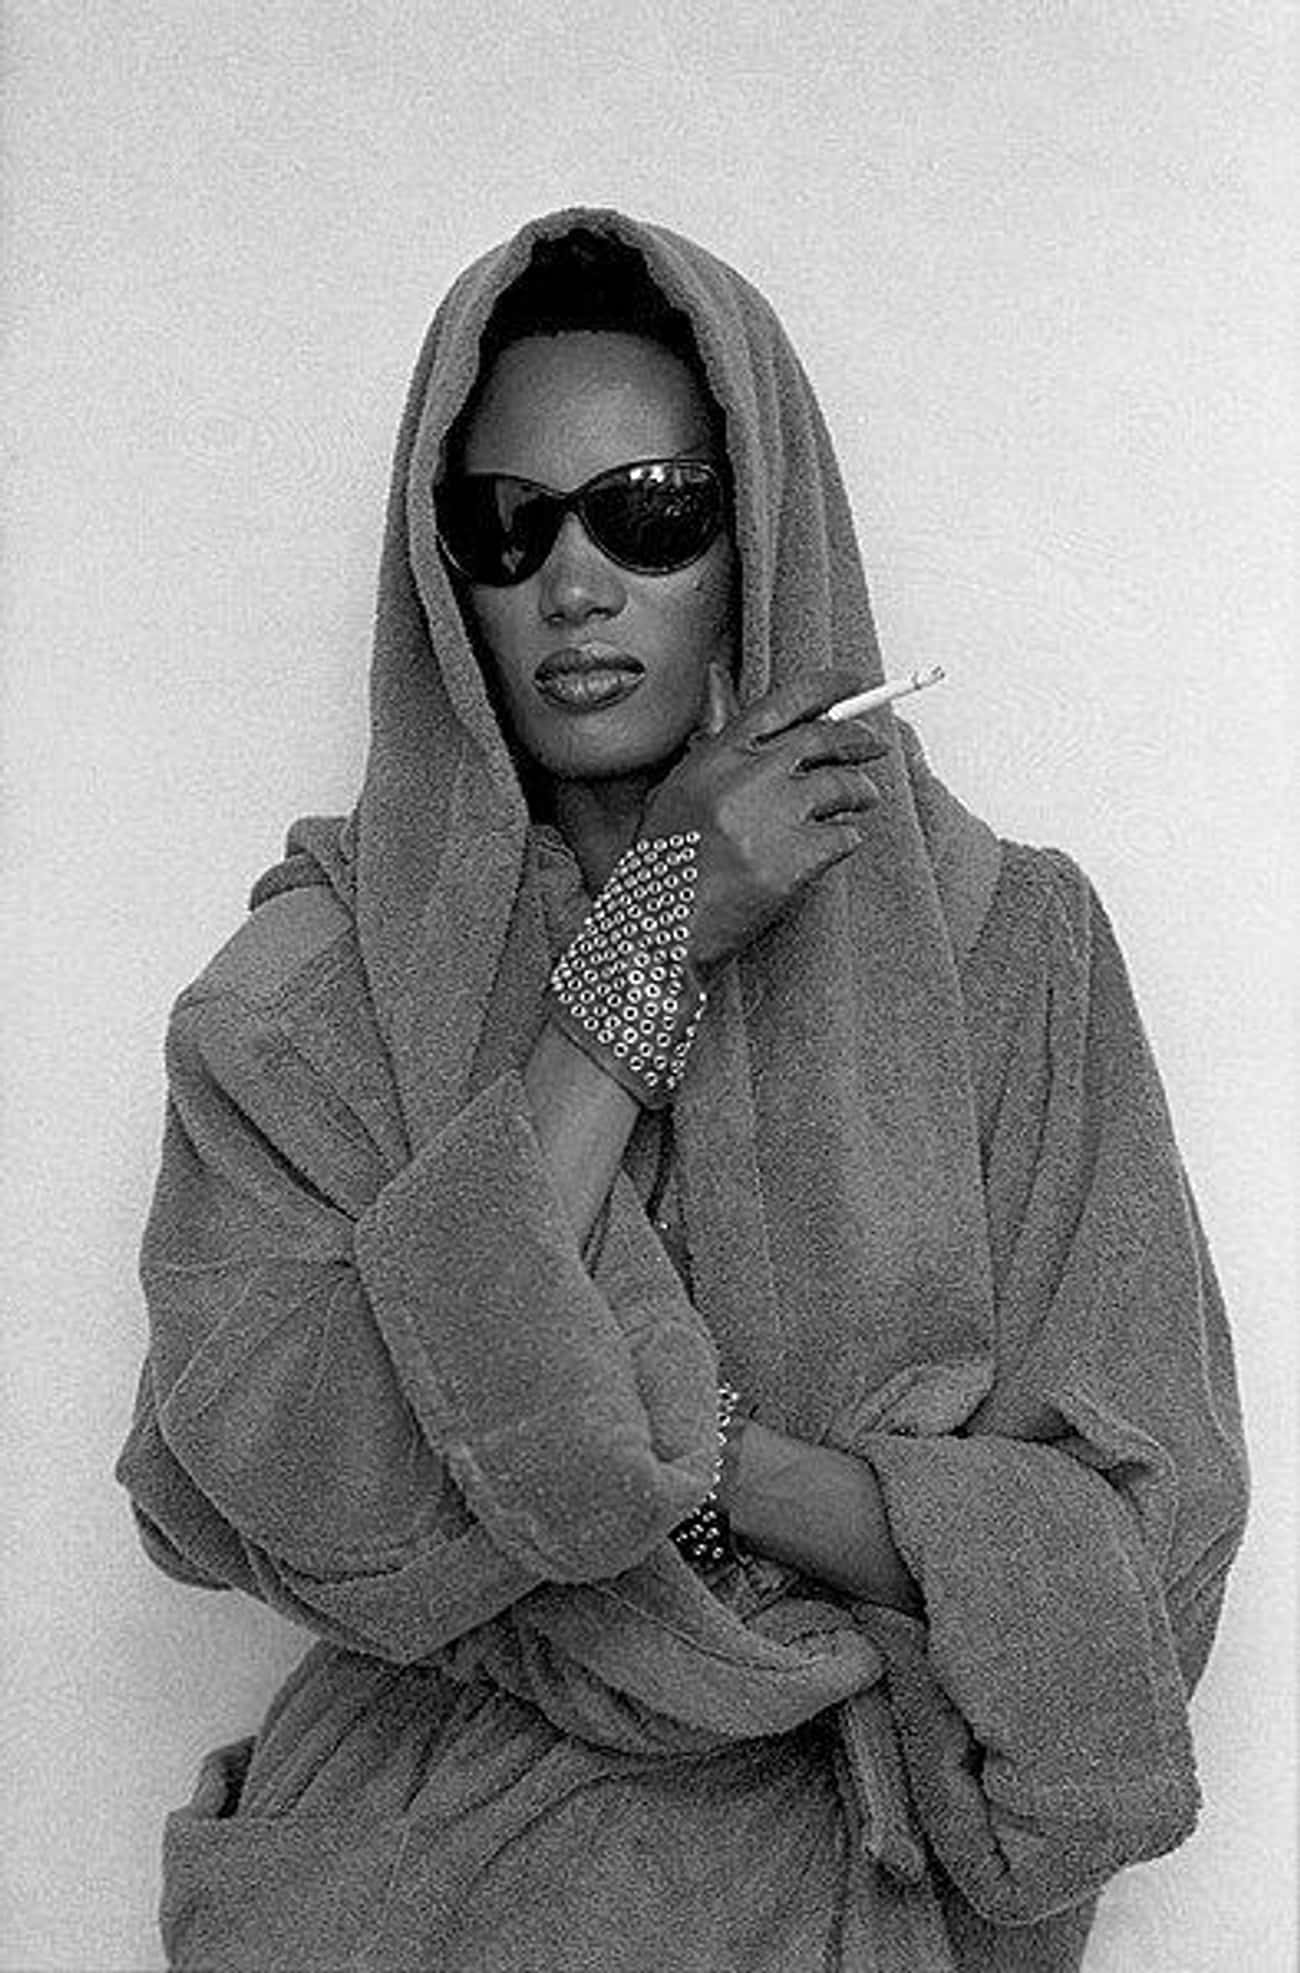 Grace Jones Didn't Enjoy Taking Cocaine The Usual Way - So She Inserted It Elsewhere